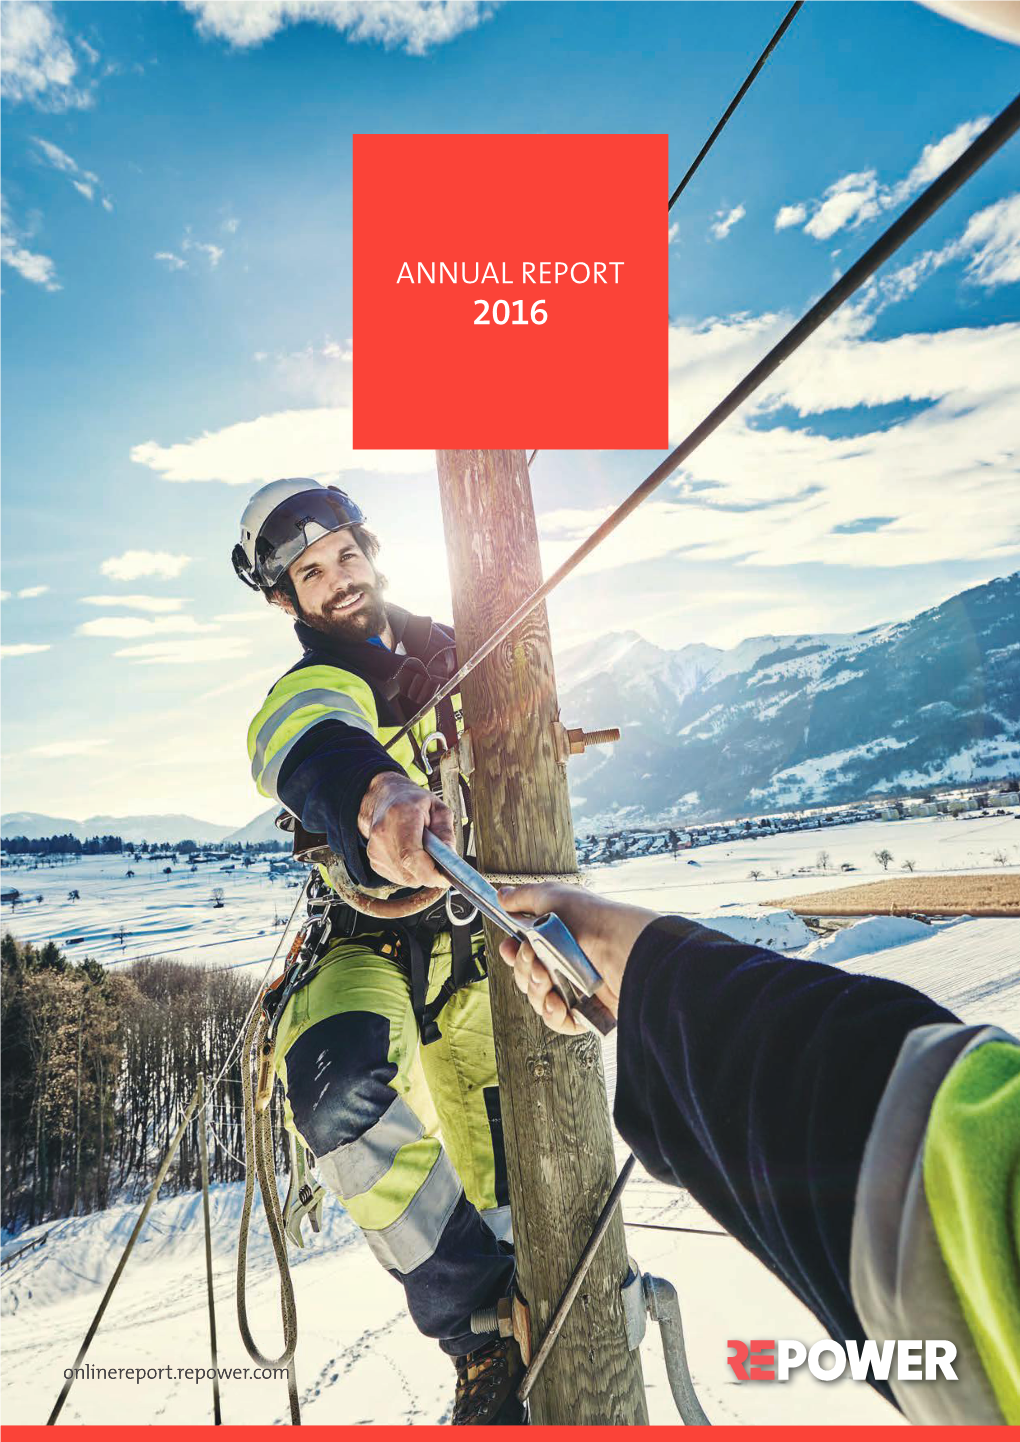 Annual Report 2016 Is Available Online